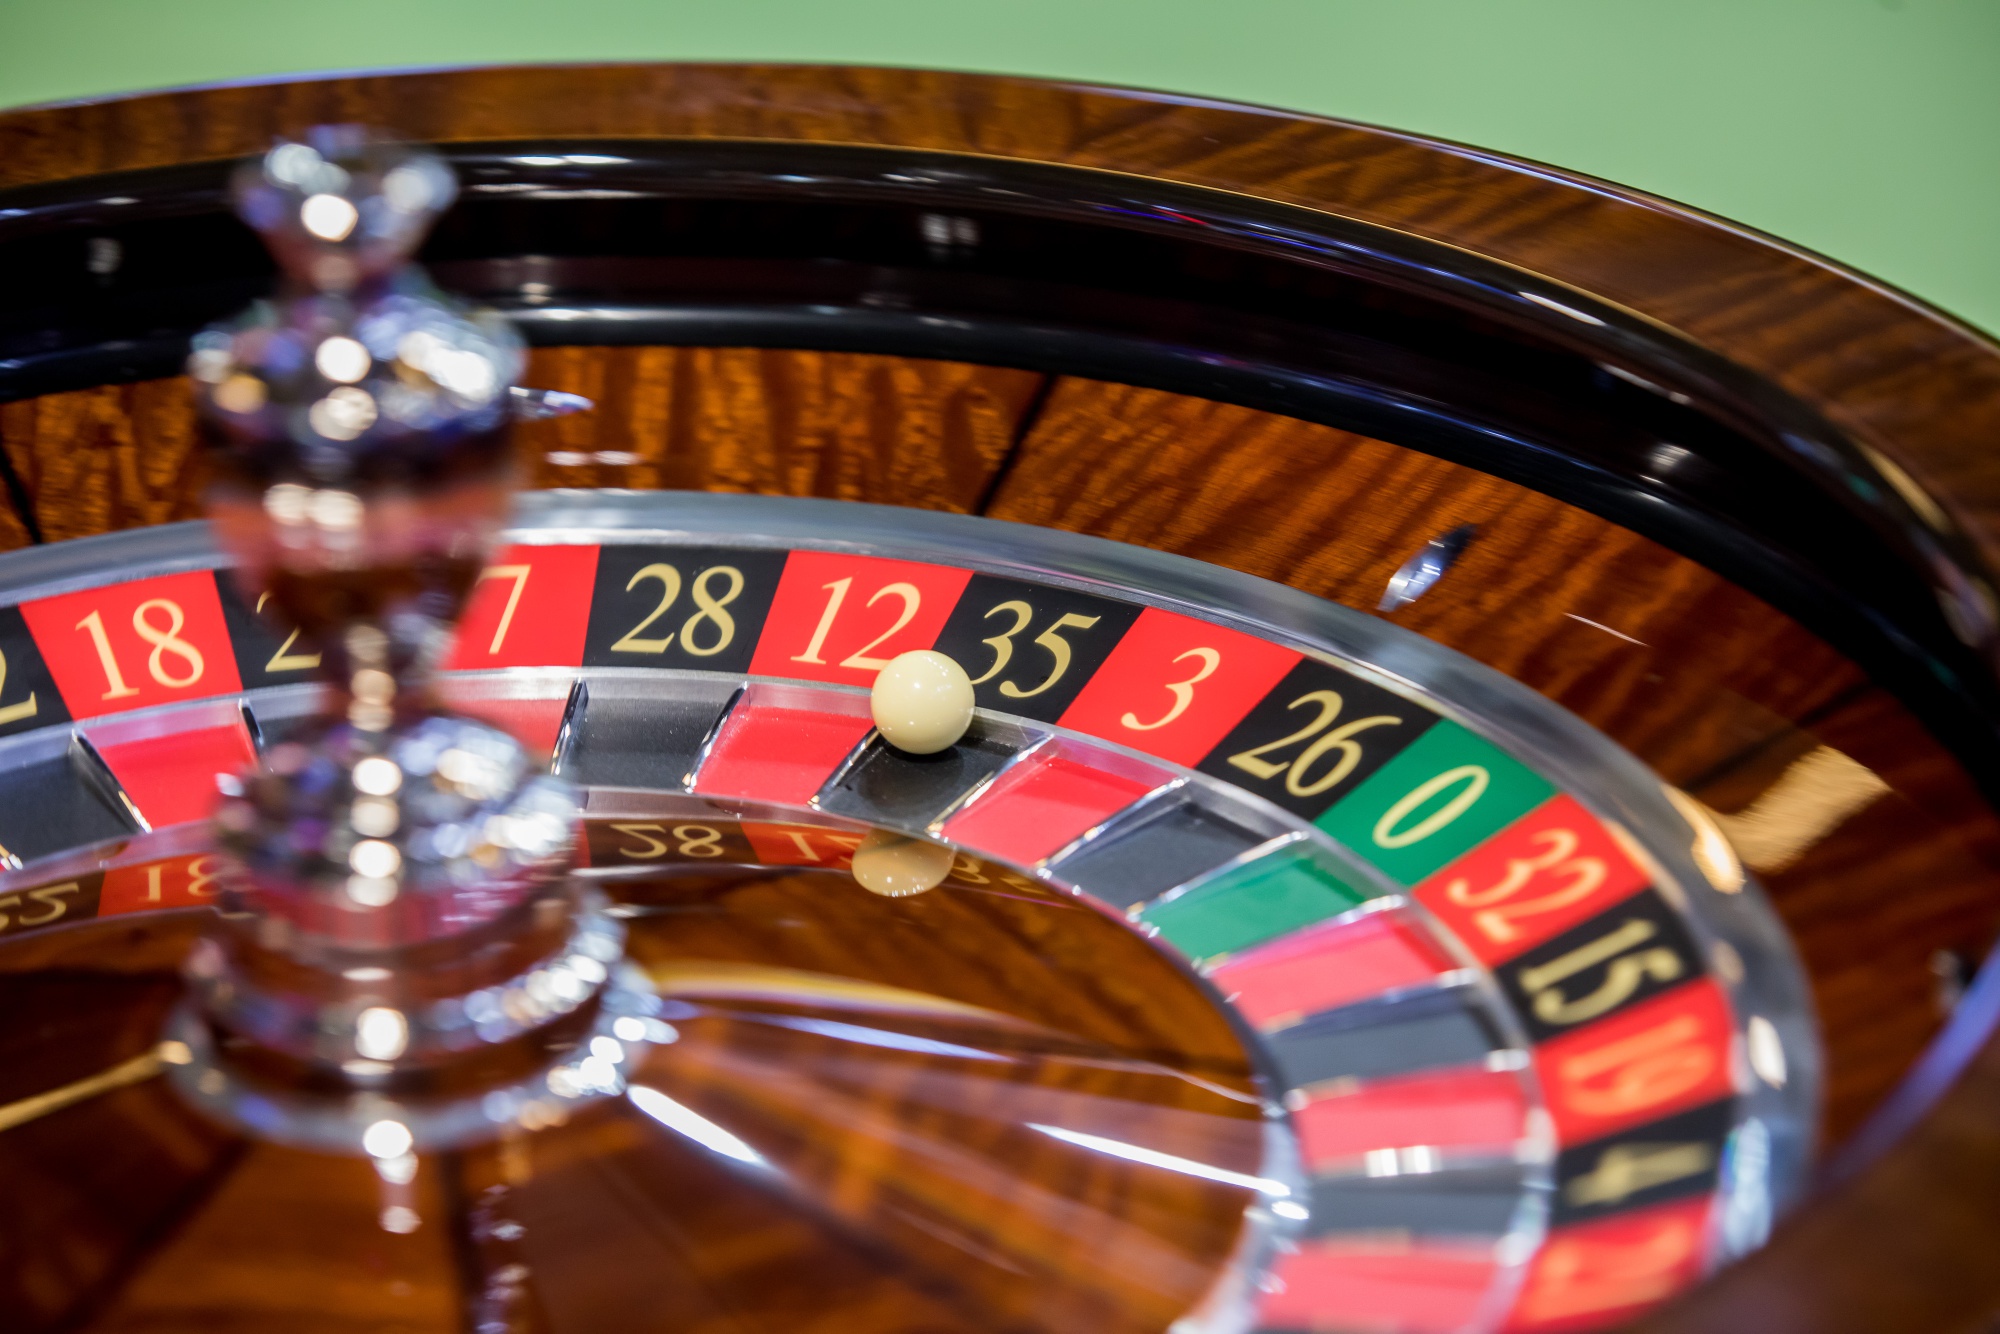 Does casinos Sometimes Make You Feel Stupid?